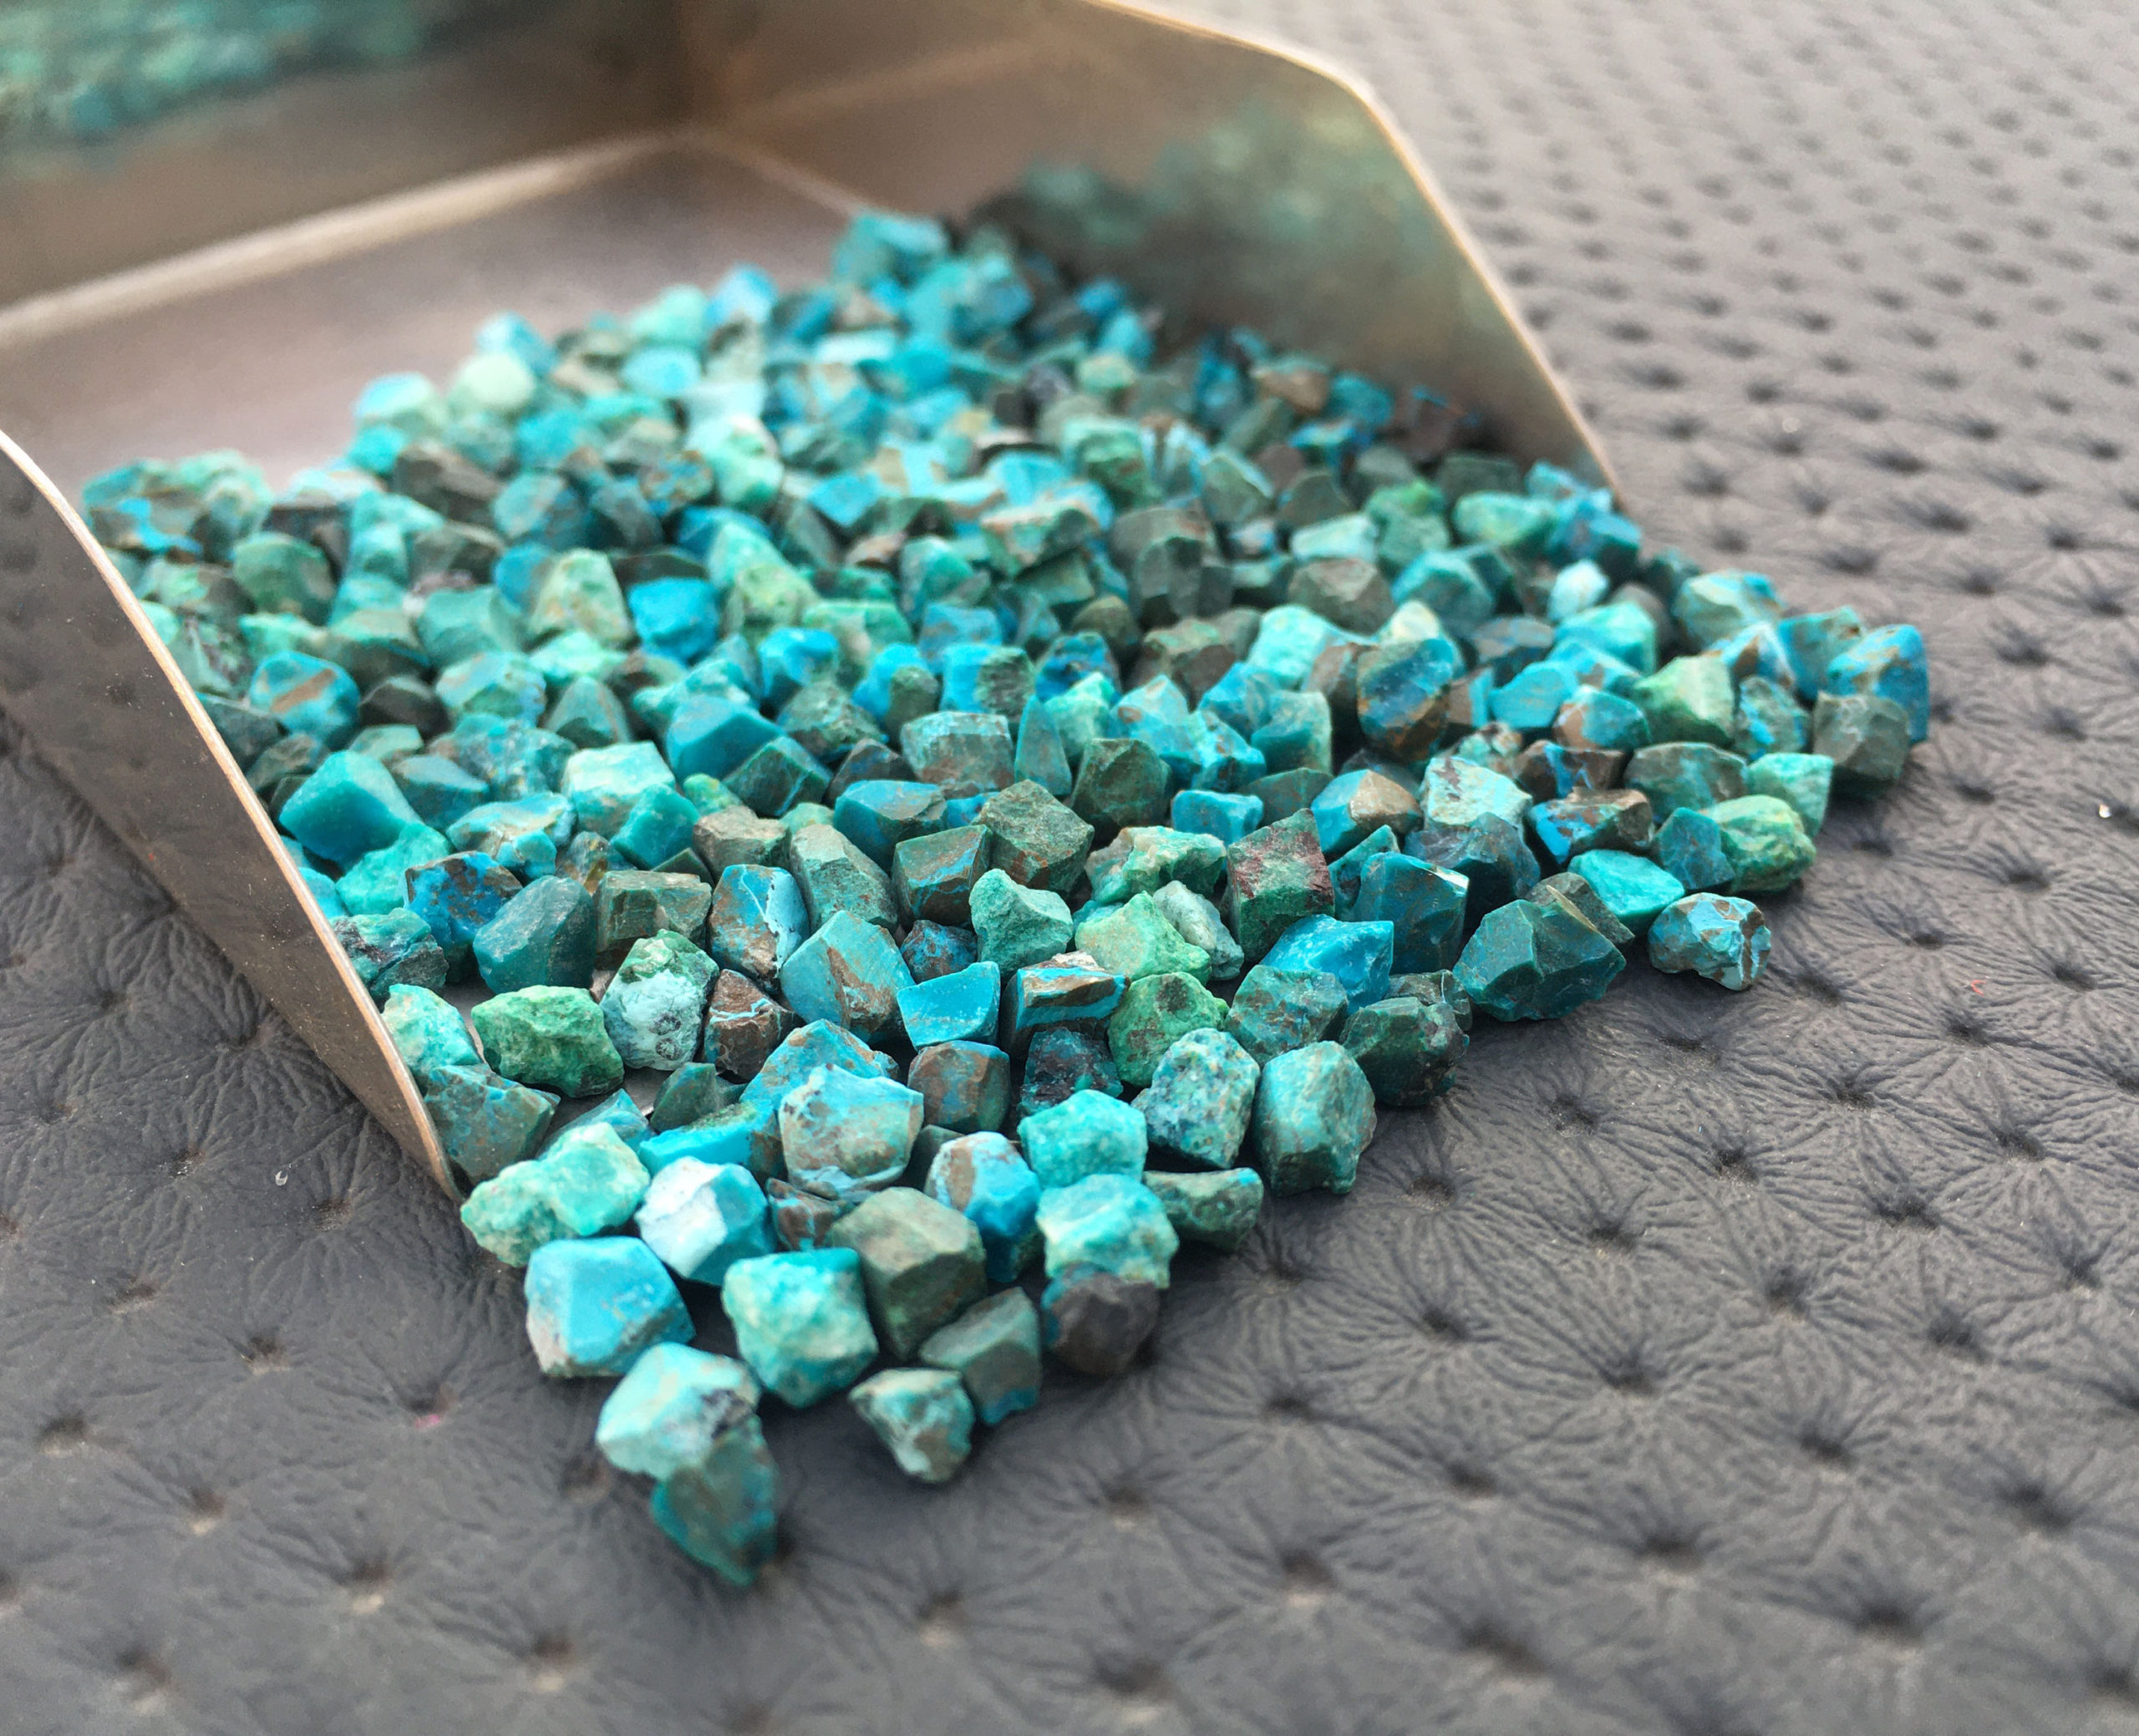 50 Pieces Tiny Chrysocolla 2-4 Mm Raw, Natural Chrysocolla Rough Gemstone, Chrysocolla Raw Stone, Semi Precious Gemstone Chrysocolla Rough